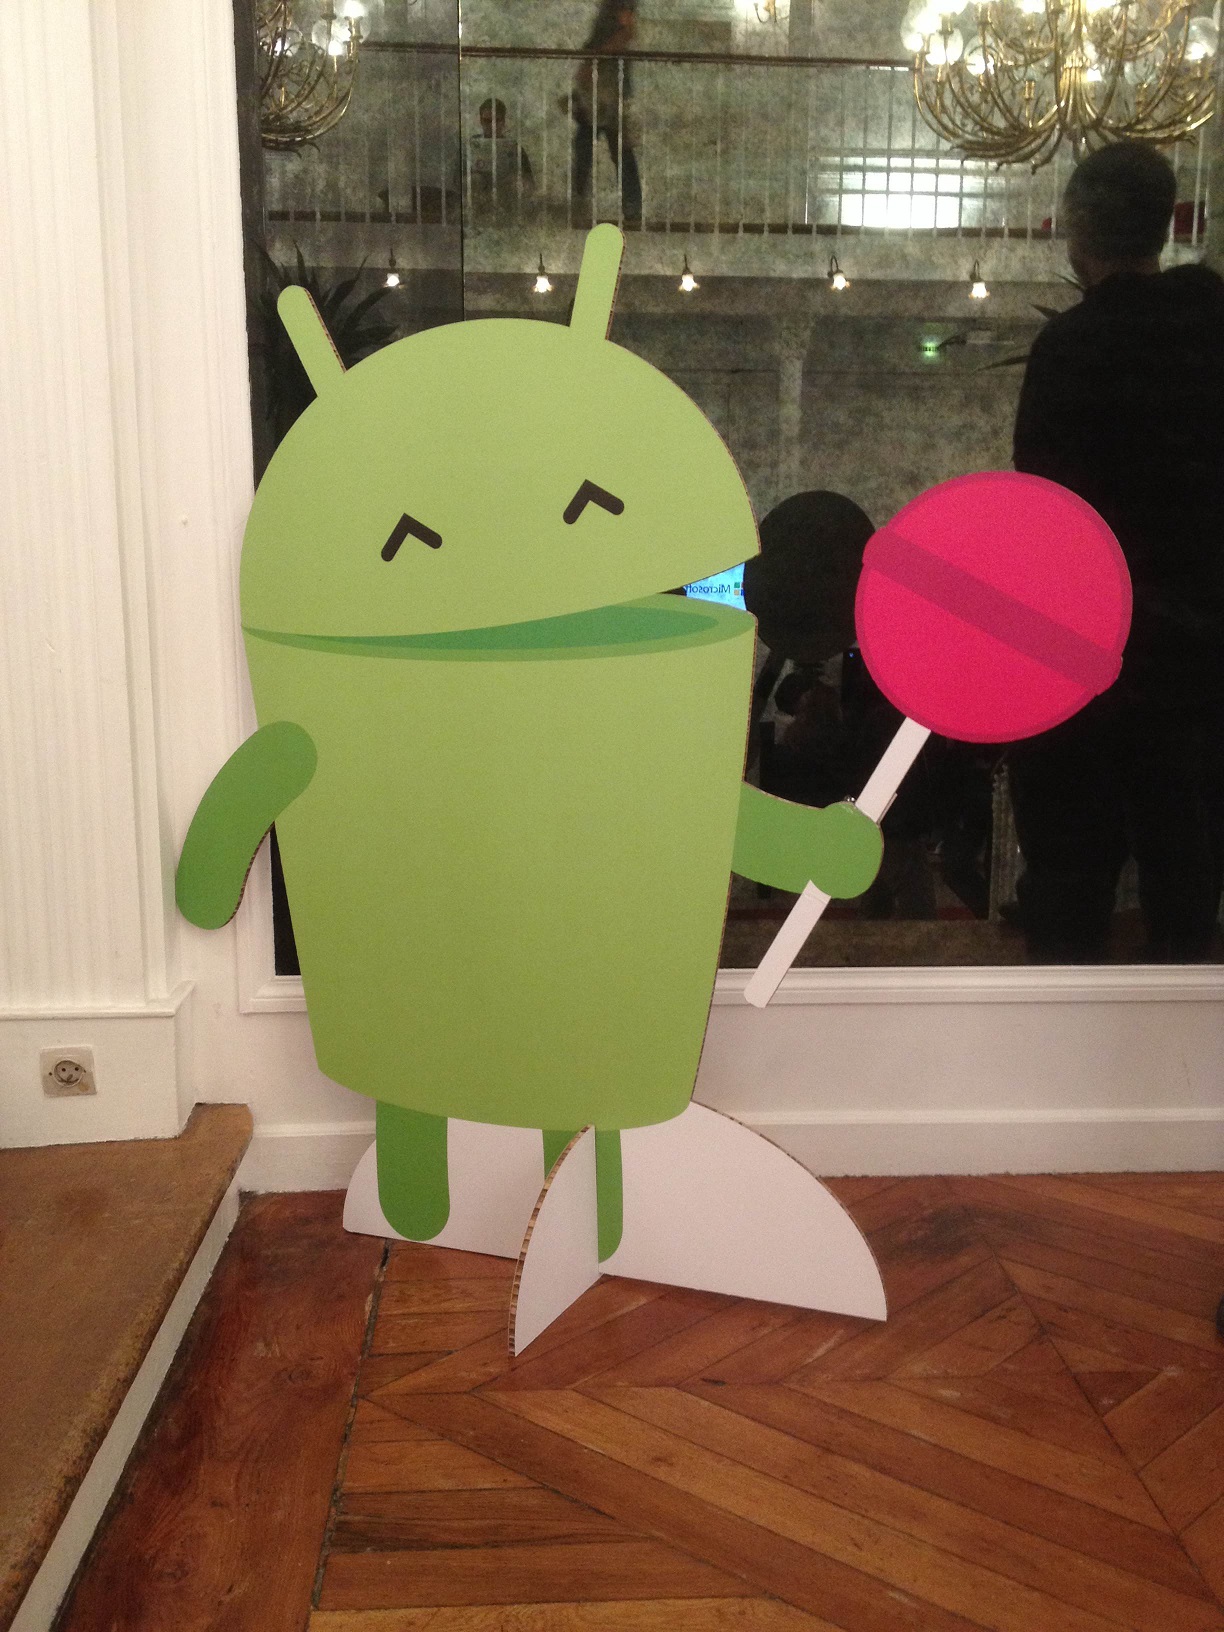 My new friend, Android Lollipop